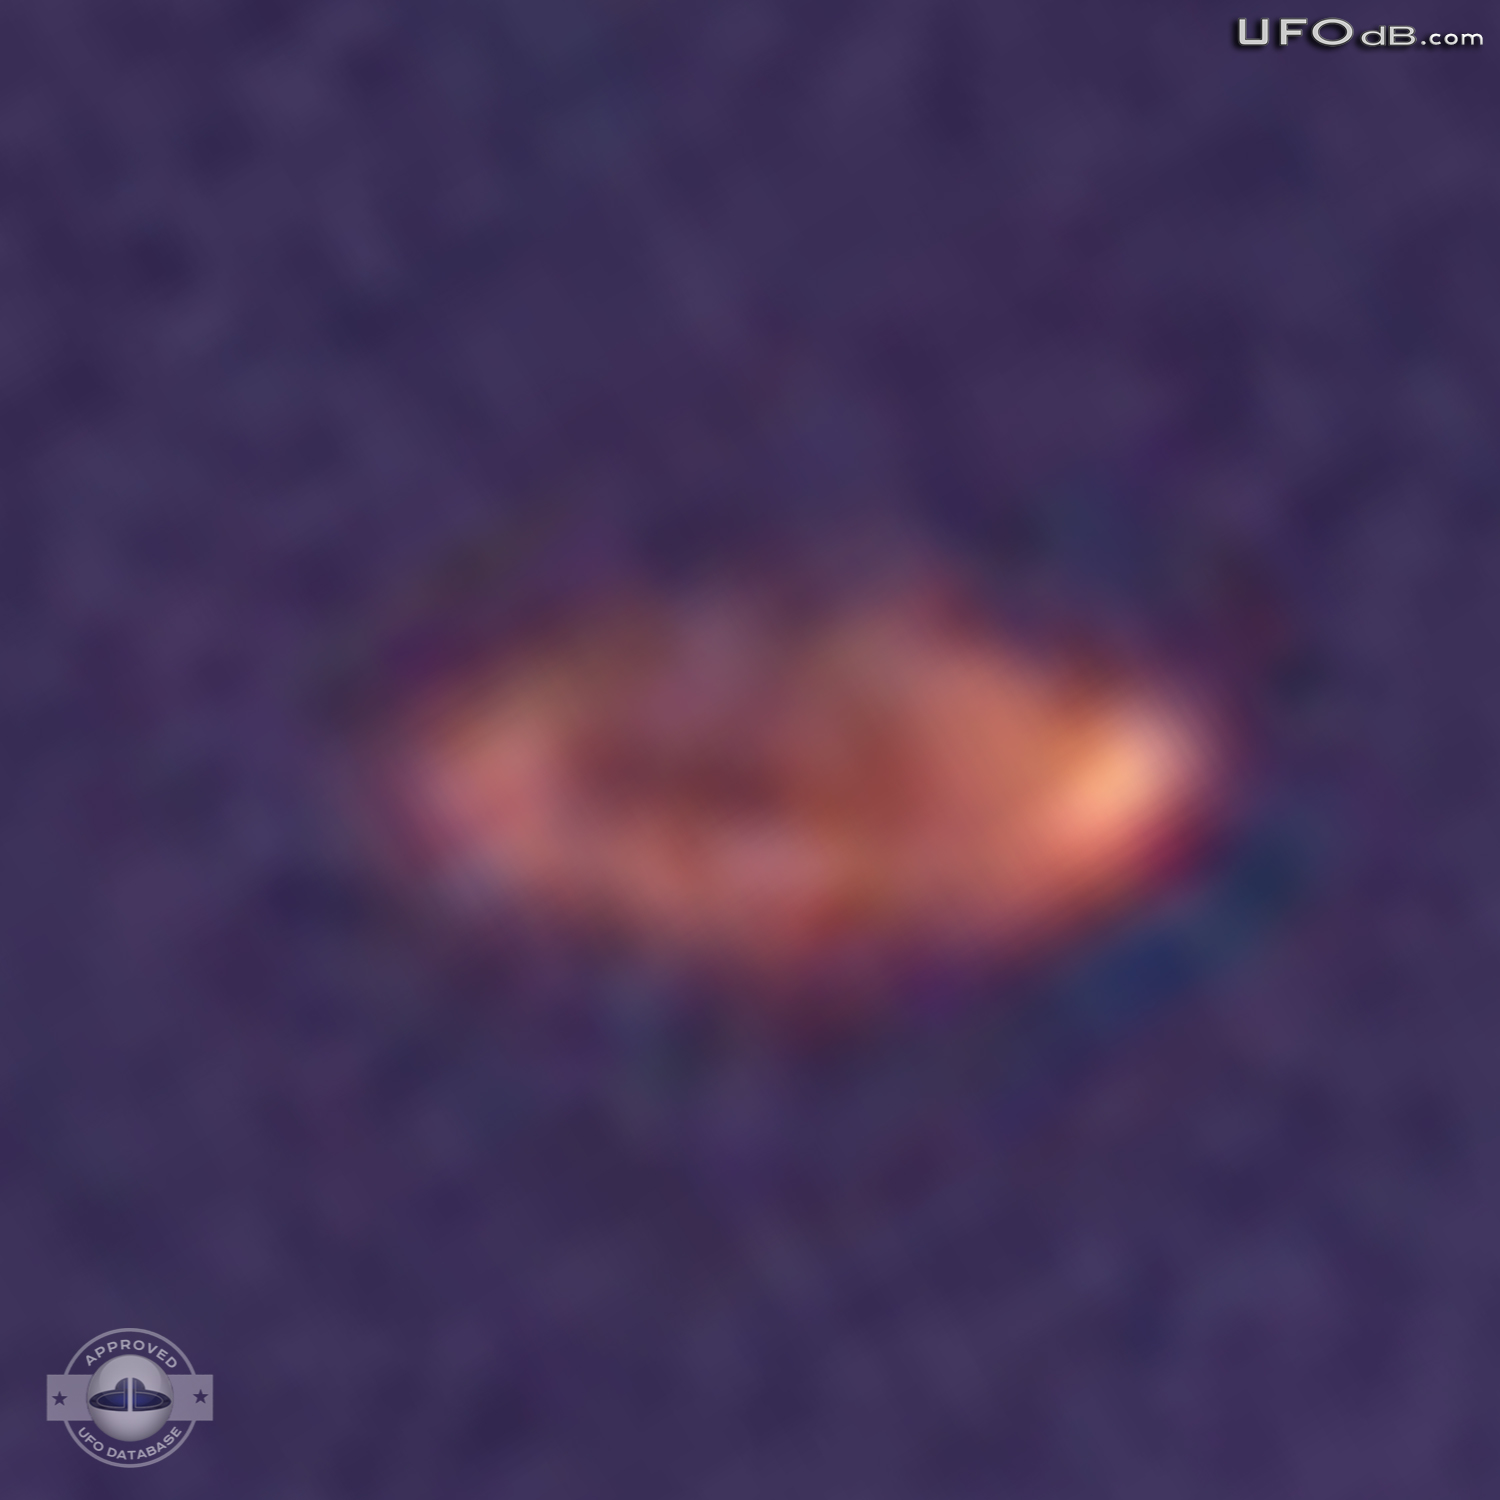 Professional photographer capture UFO near lightnings in Portugal 2010 UFO Picture #345-6